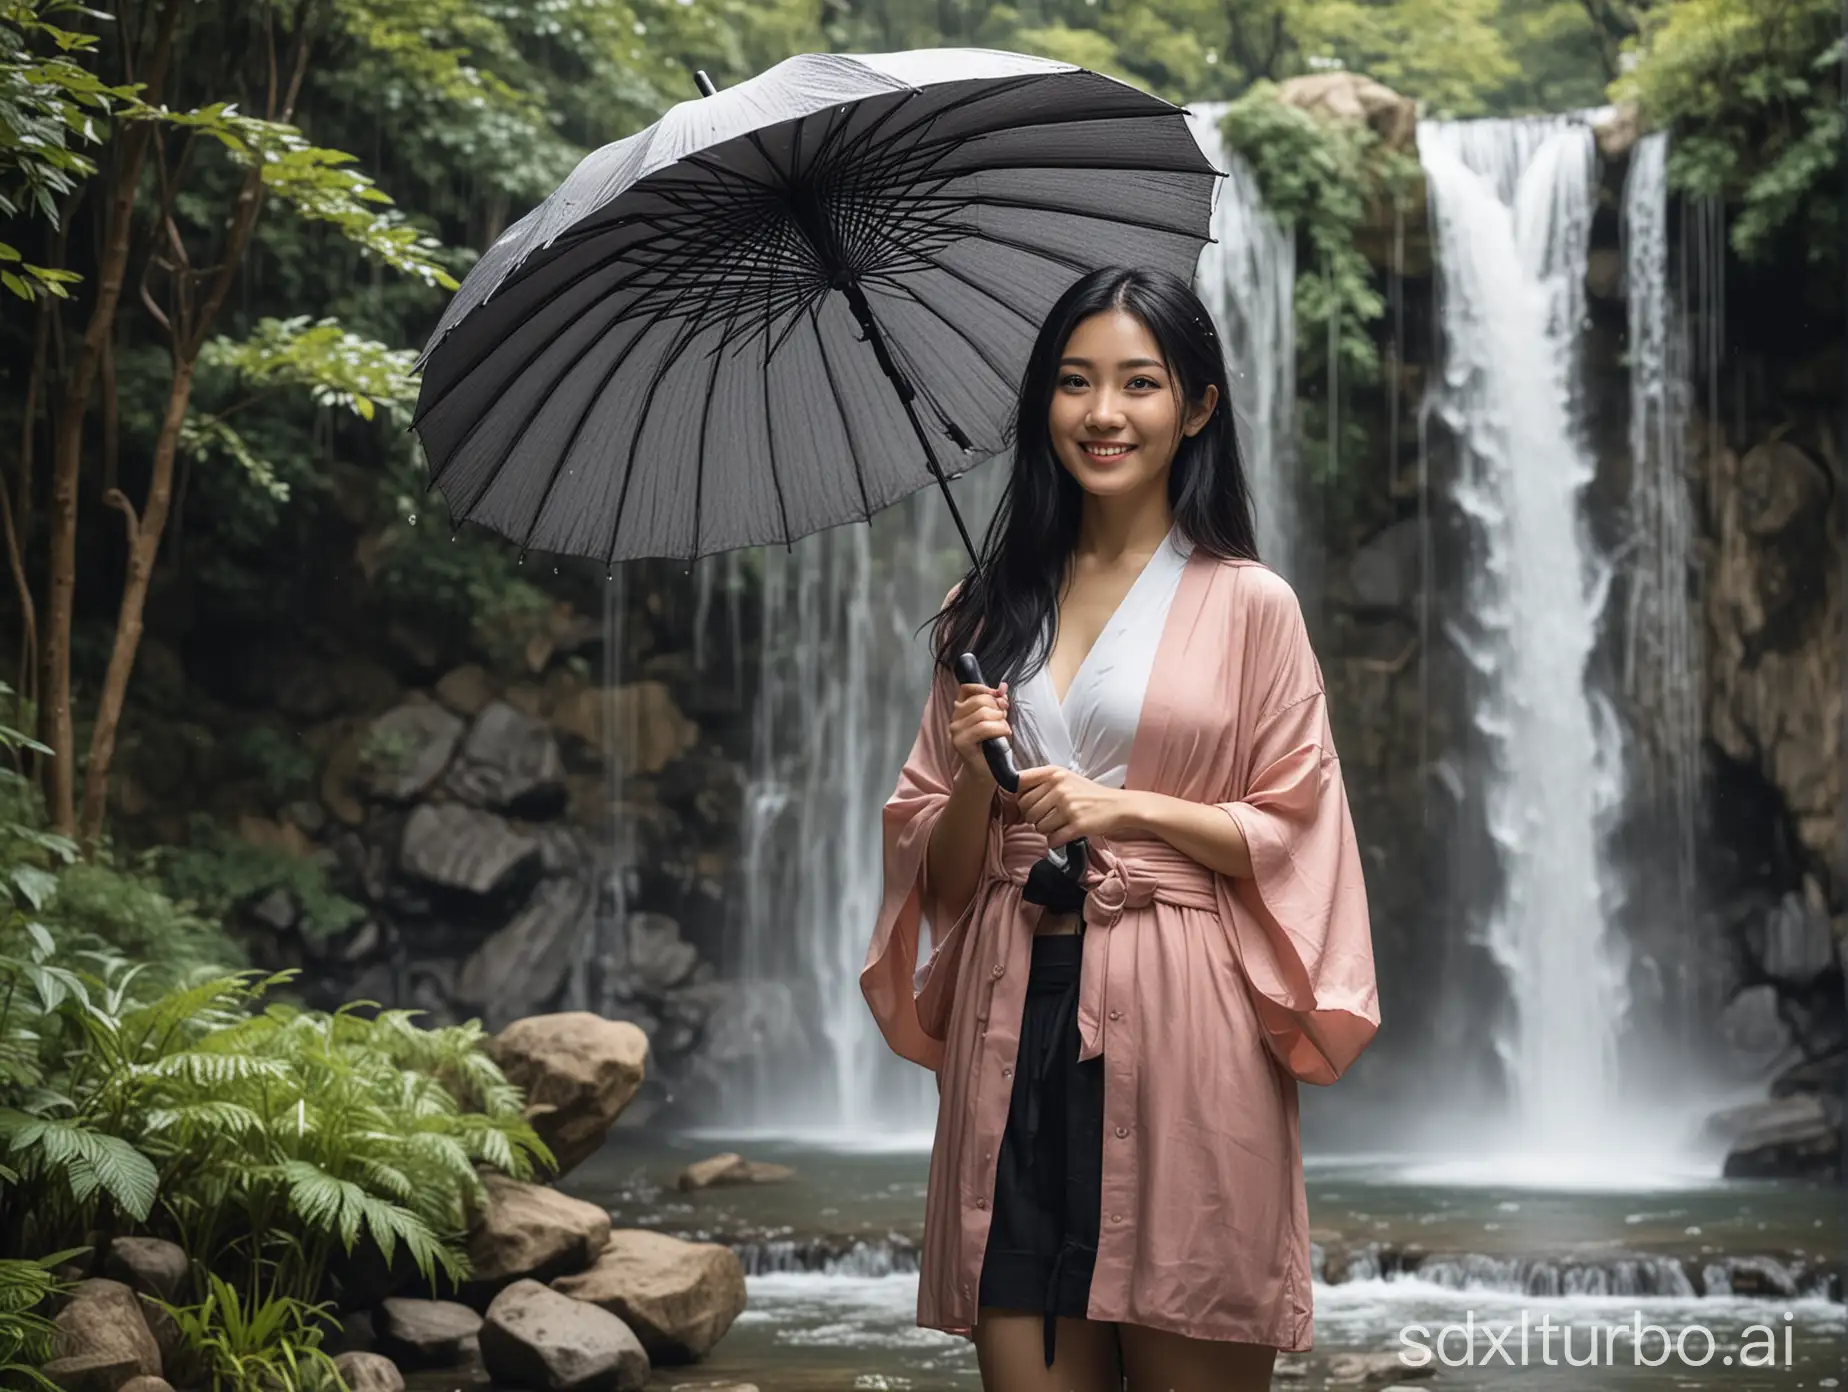 beautiful intellectual typical Japanese 33-year-old girl stands in fornt of a waterfall with an umbrella, smiling, Instagram model, long black hair, warm, black eyes, height 6.5 feets, female, masterpiece, 4k, correct fingers or hands